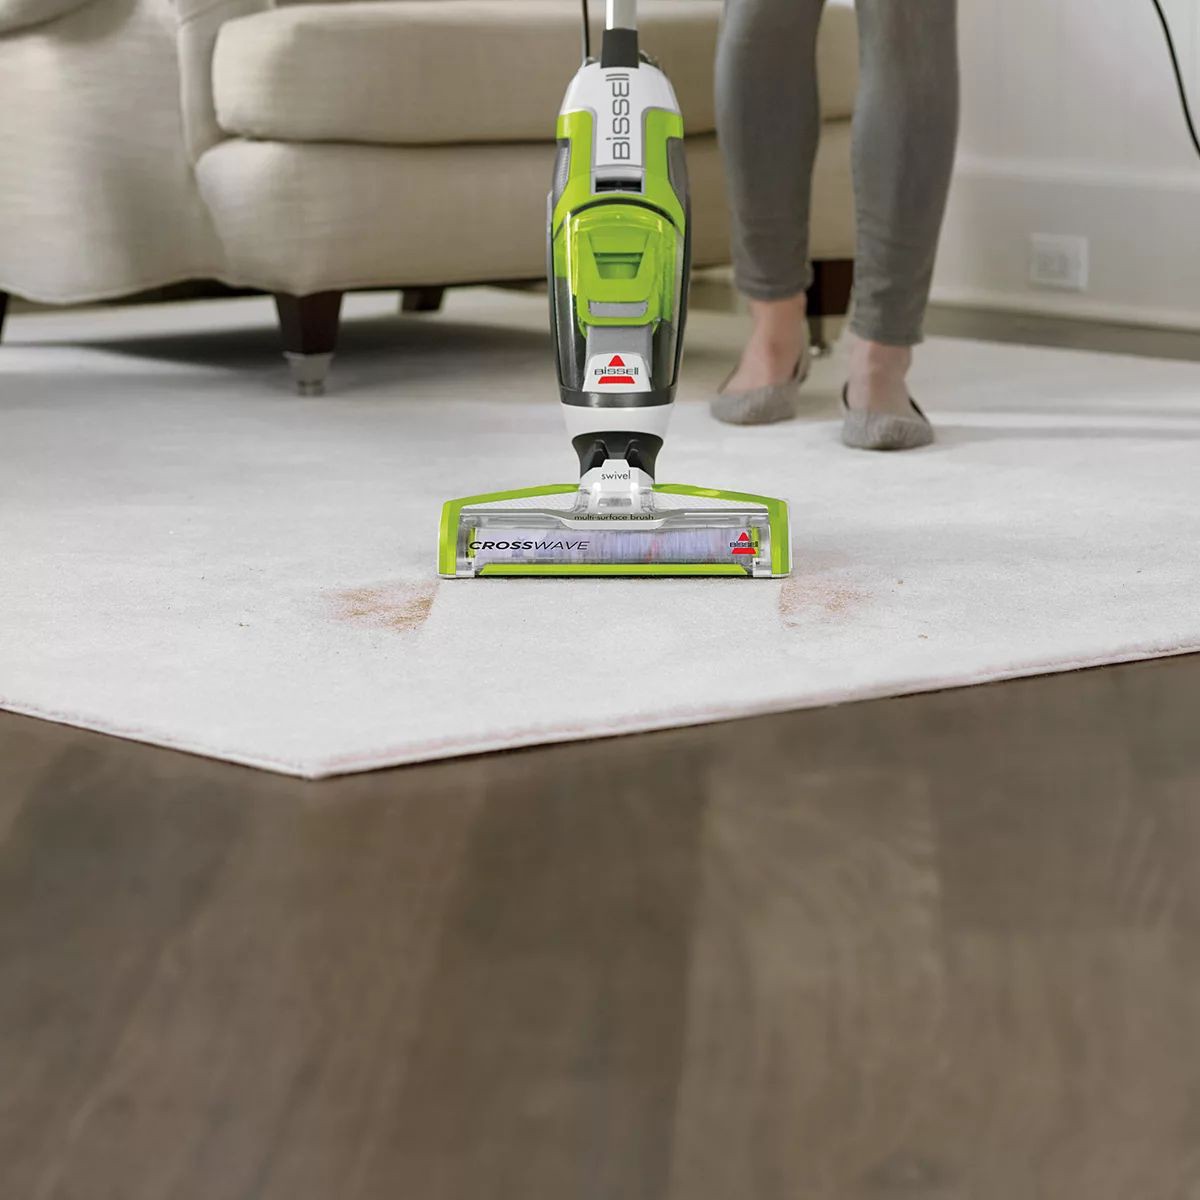 BISSELL CrossWave All-in-One 2 Speeds 4.4-A Multi-Surface Cleaner 1785C